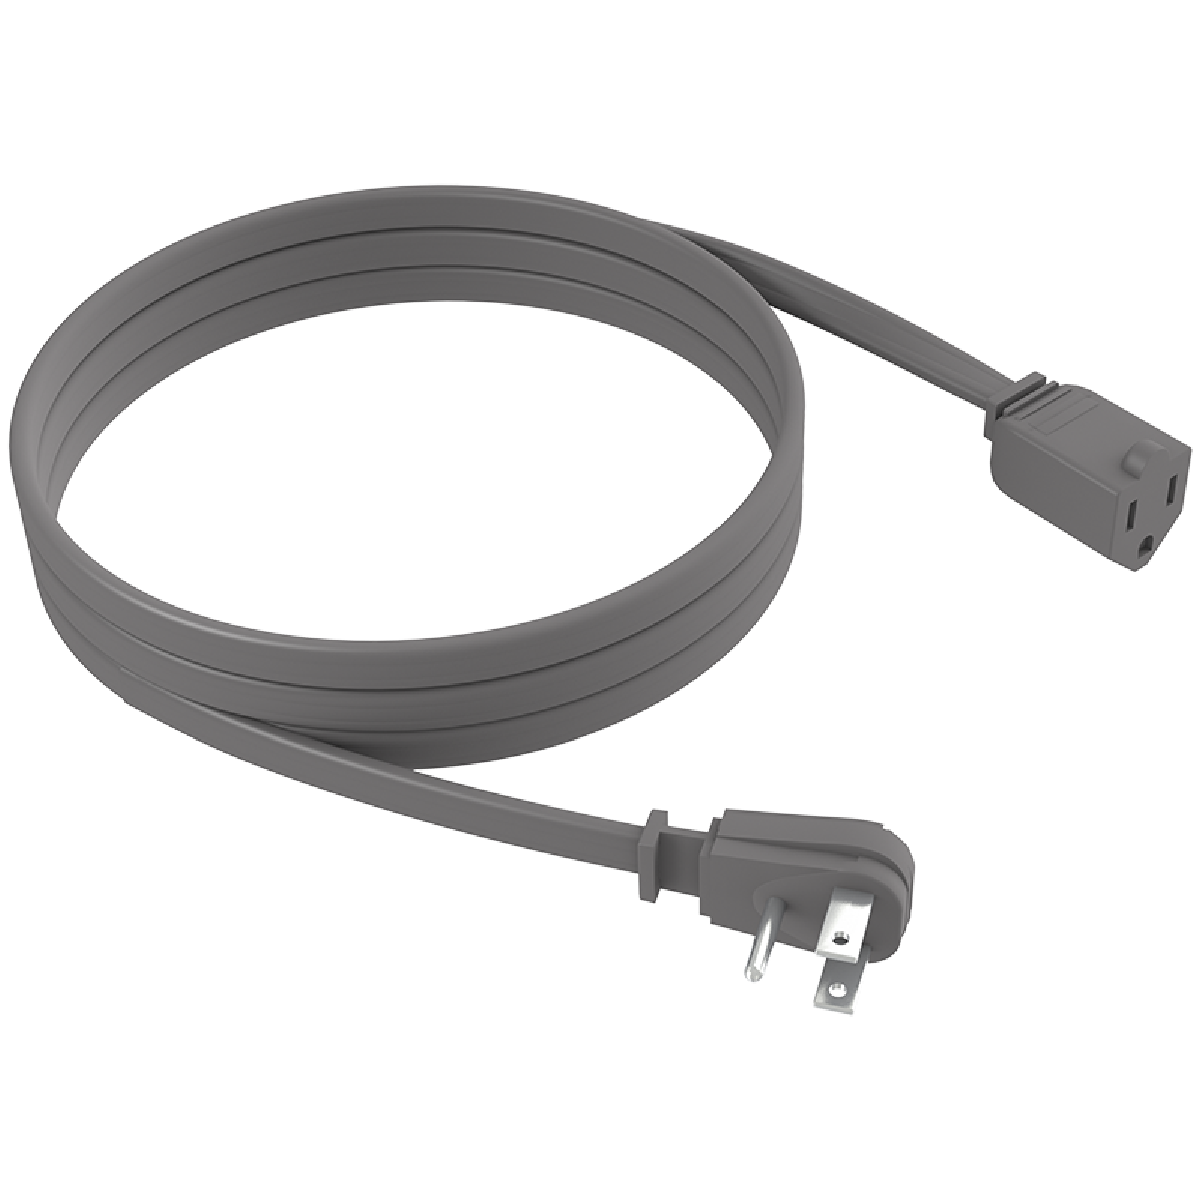 STANLEY APPLIANCE CORD (GREY) - Stanley Electrical Accessories